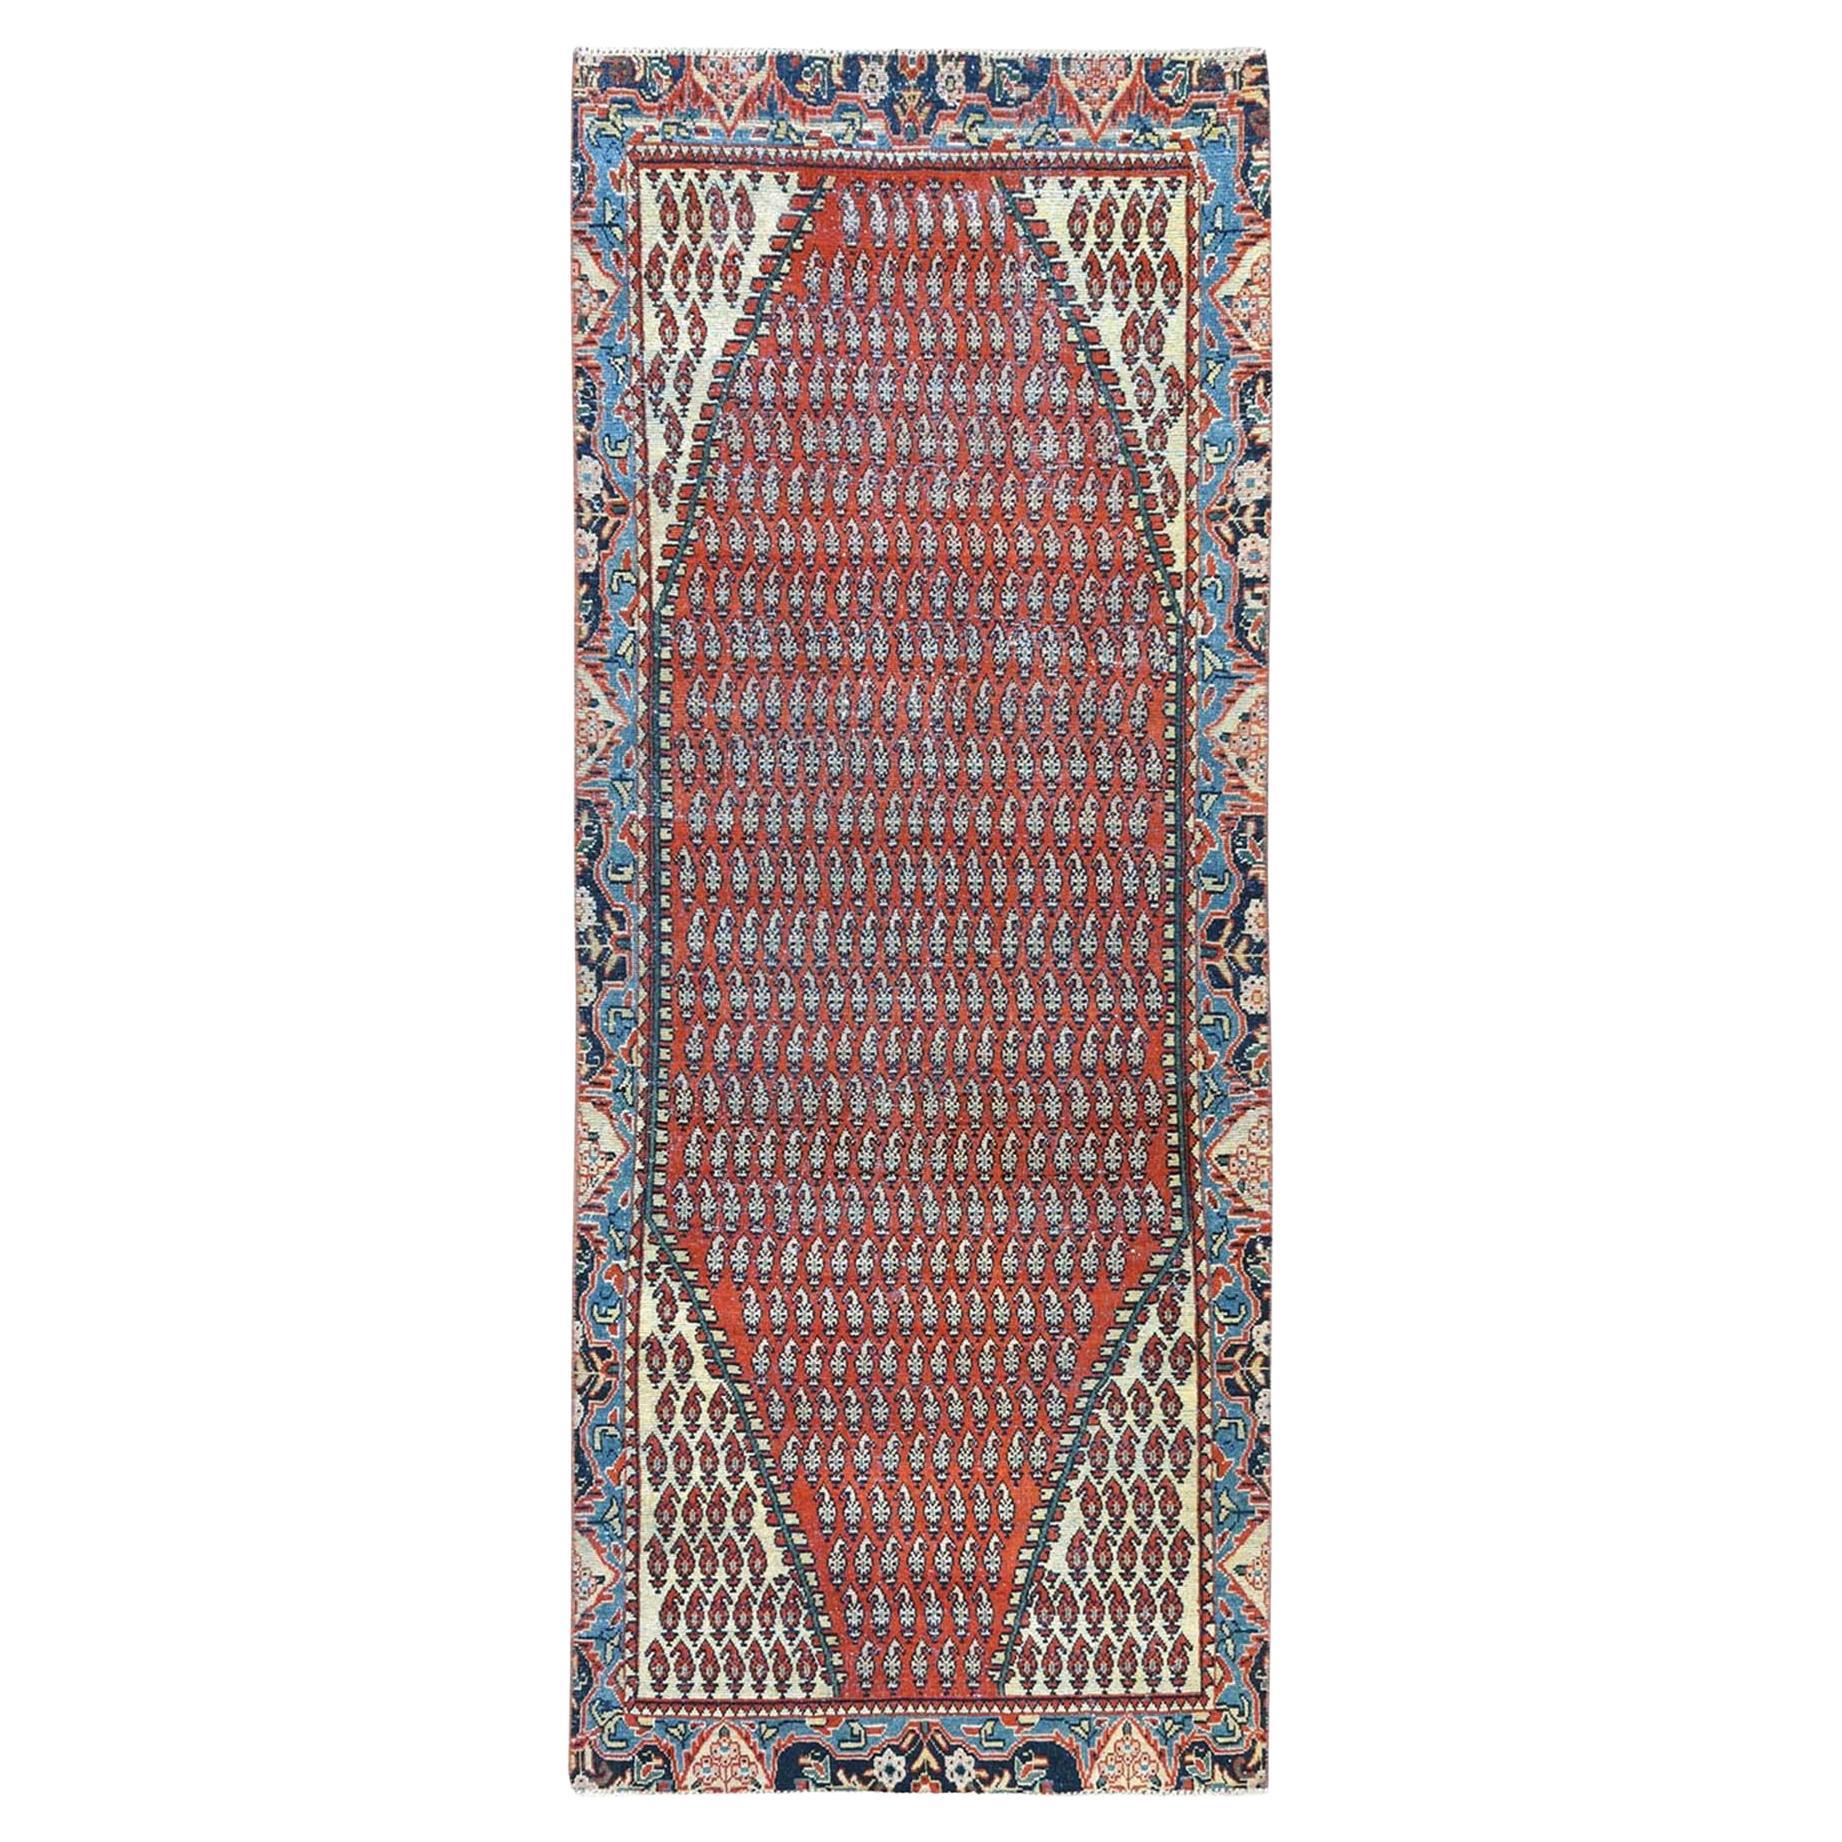 Tomato Red, Pure Wool, Vintage Persian Serab, Hand Knotted Distressed Runner Rug